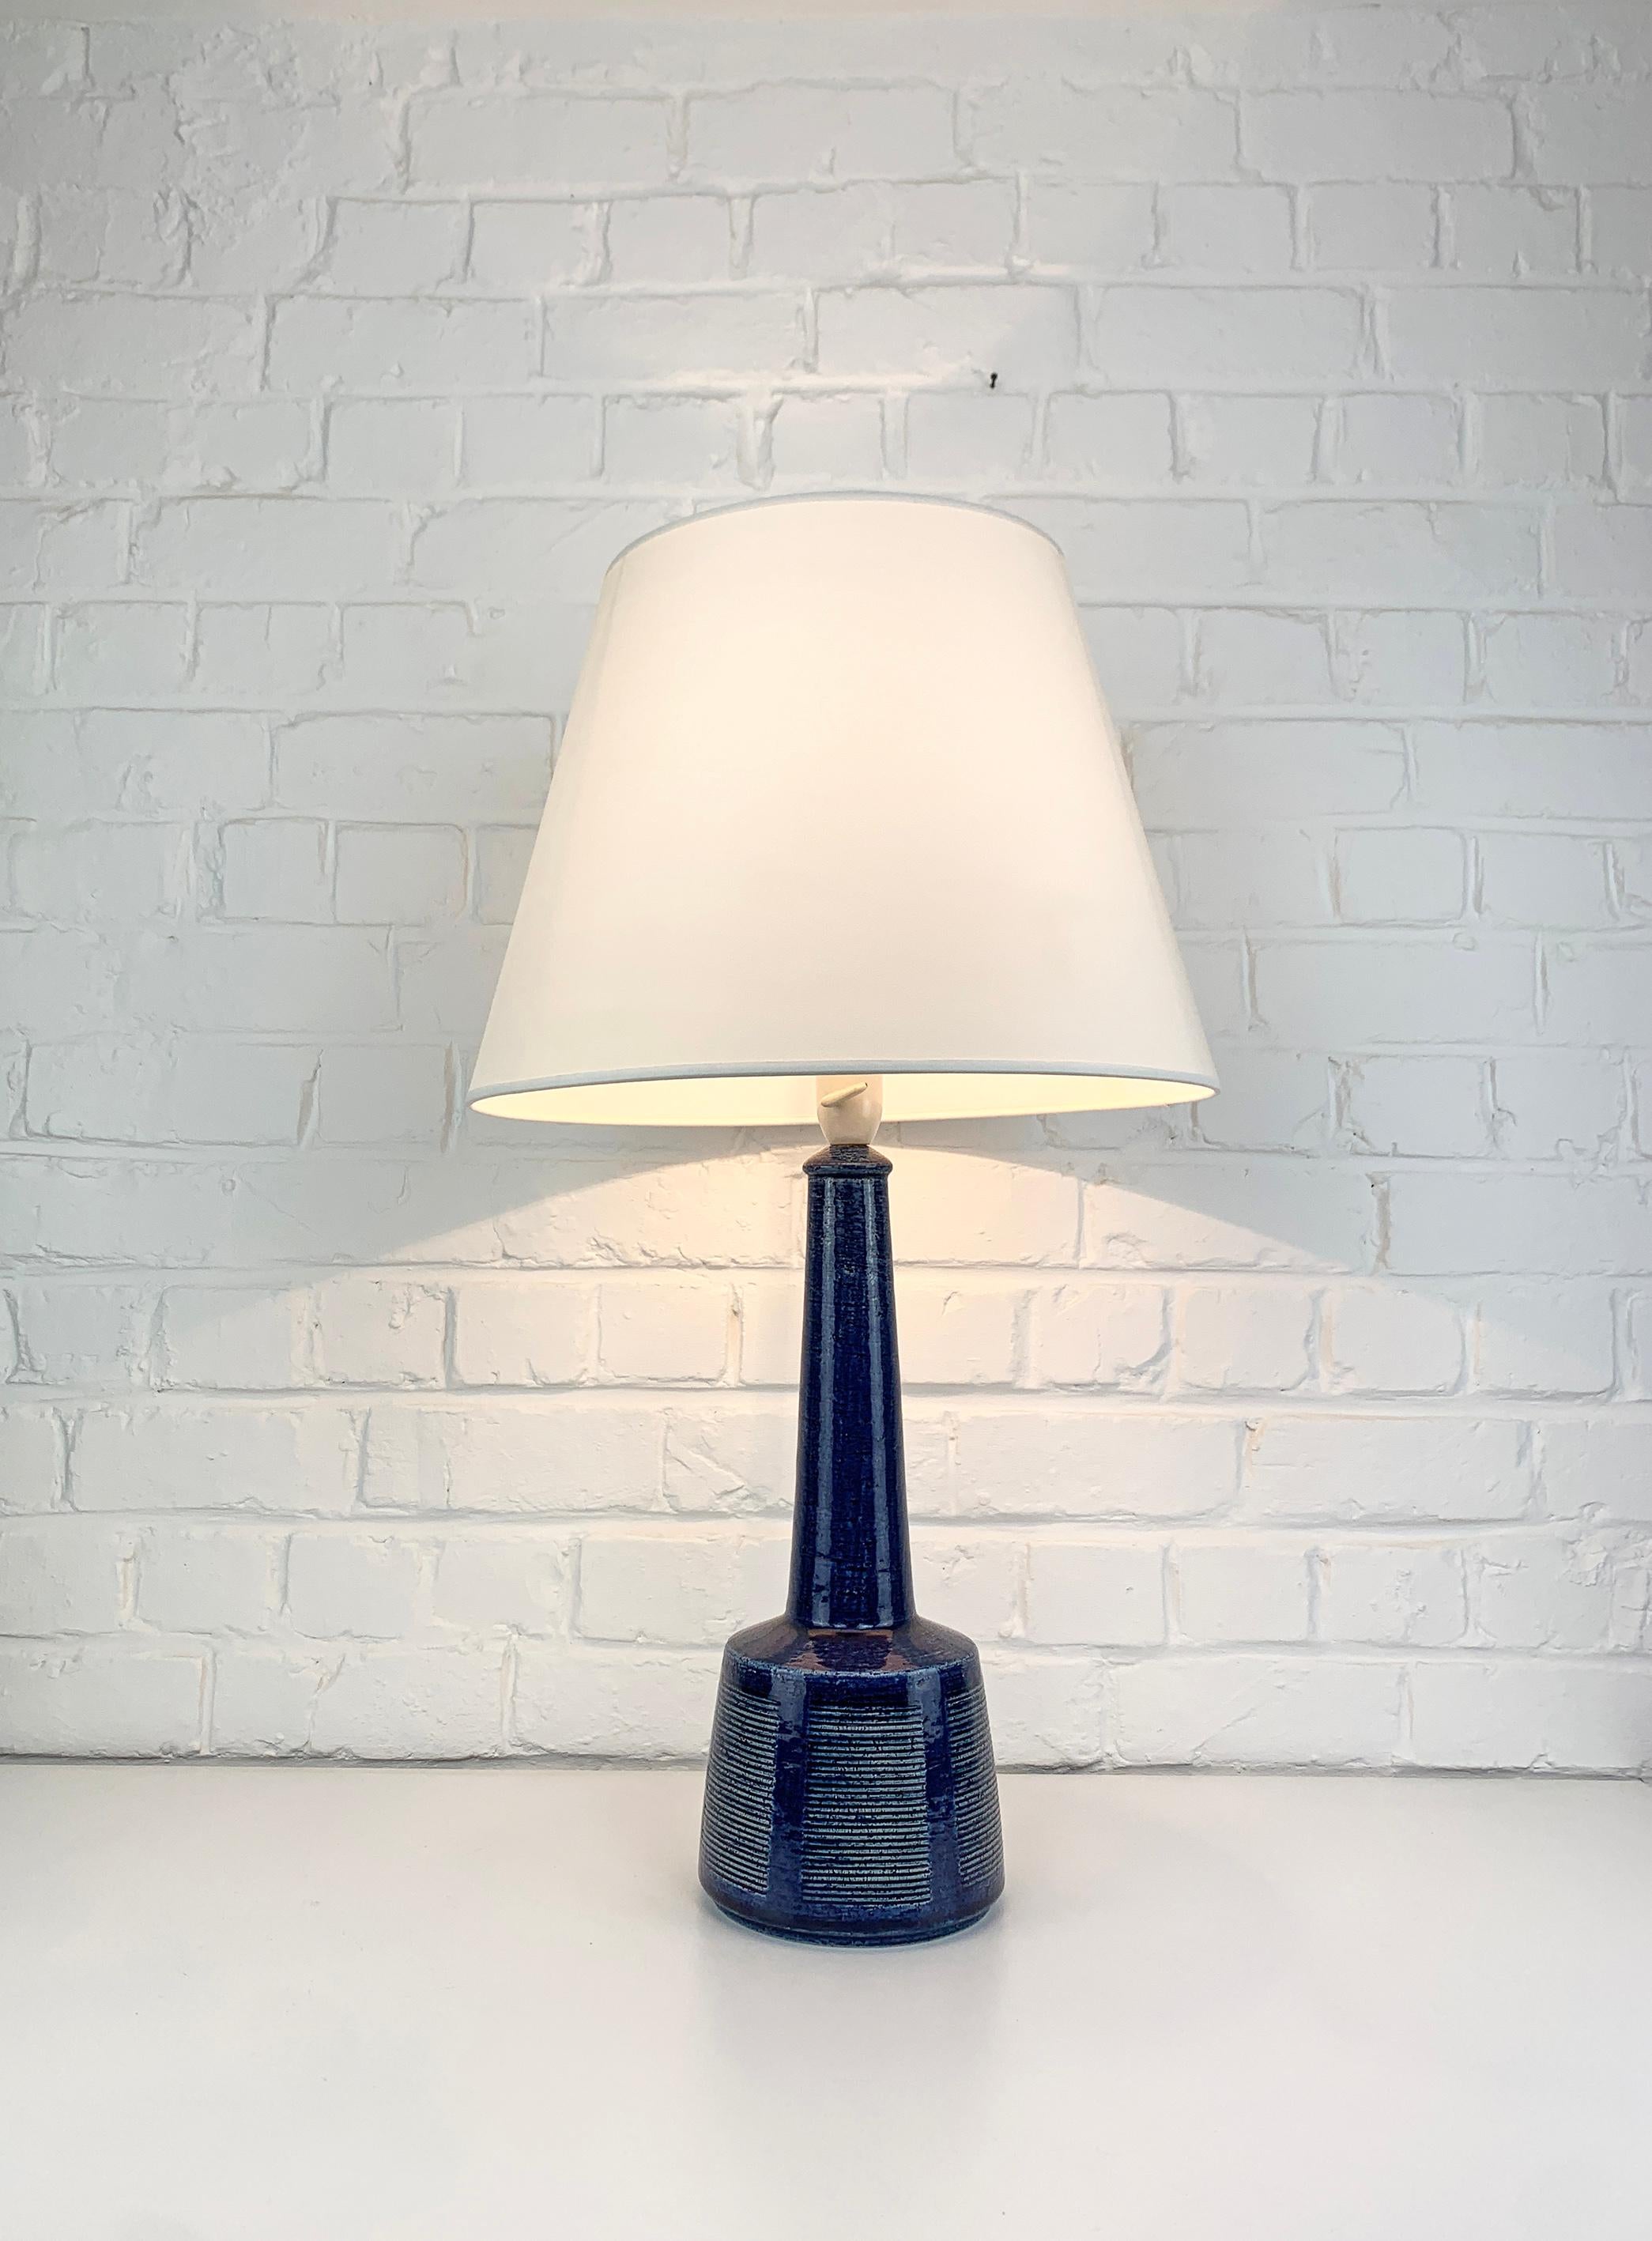 The lamp has been designed by Esben Klint, the son of Kaare Klint (the famous danish furniture designer). Esben has created a timeless design with this model, it has a contemporary and graphic side despite being over 50 years old.

These lamps have